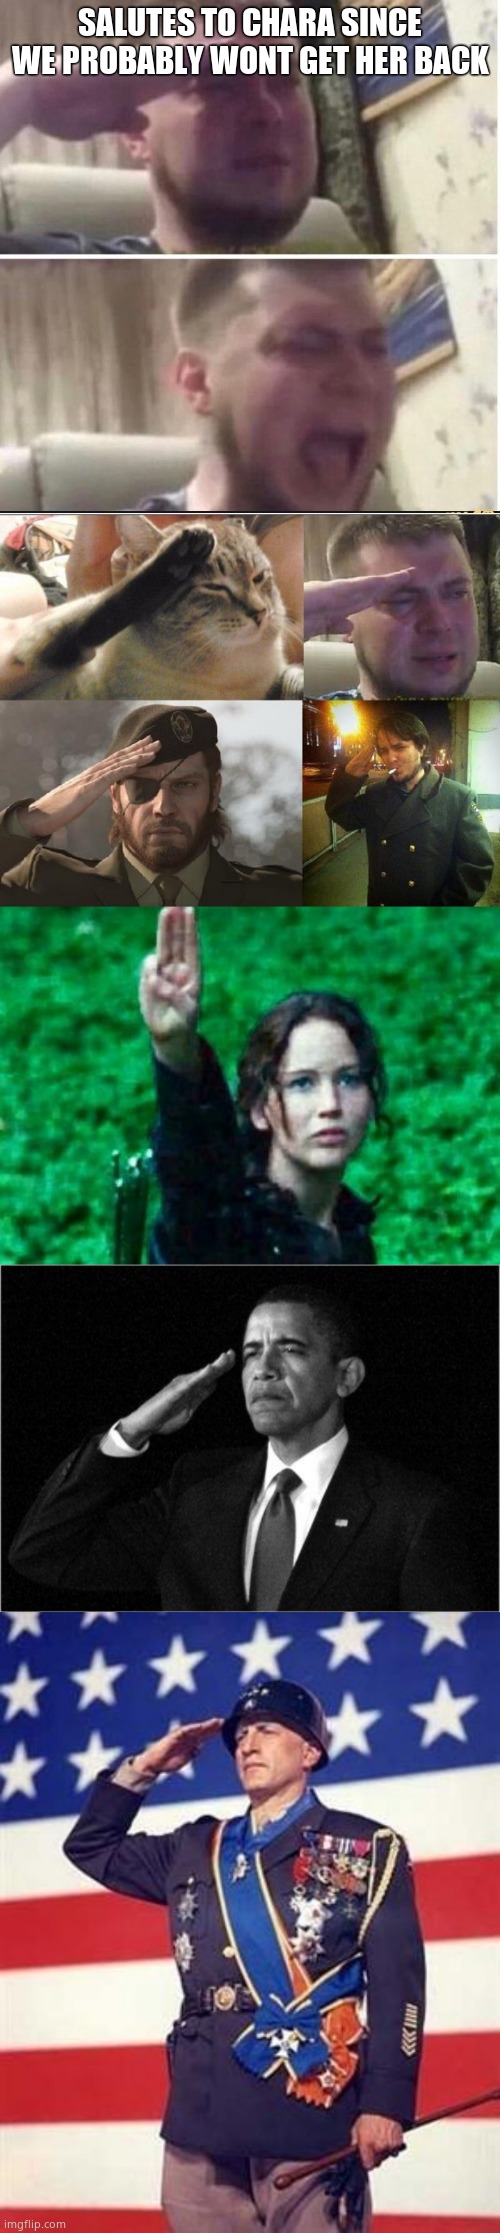 SALUTES TO CHARA SINCE WE PROBABLY WONT GET HER BACK | image tagged in crying salute,ozon's salute,katniss salute,obama-salute,patton salutes you | made w/ Imgflip meme maker